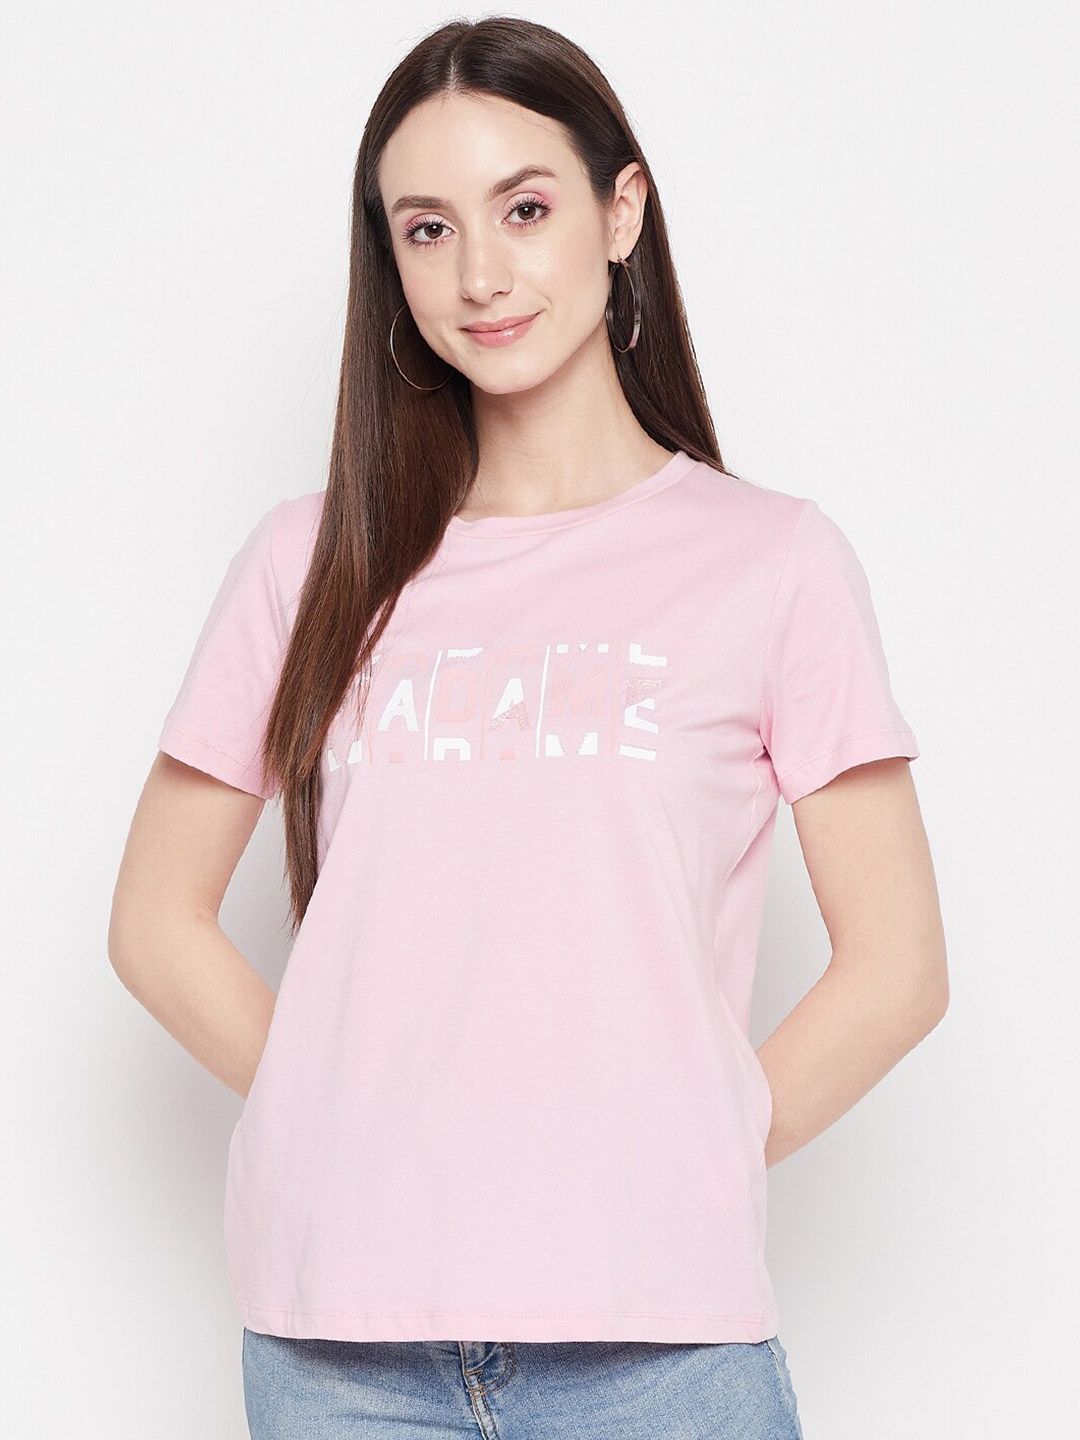 Madame Women Typography Printed Cotton T-shirt Price in India